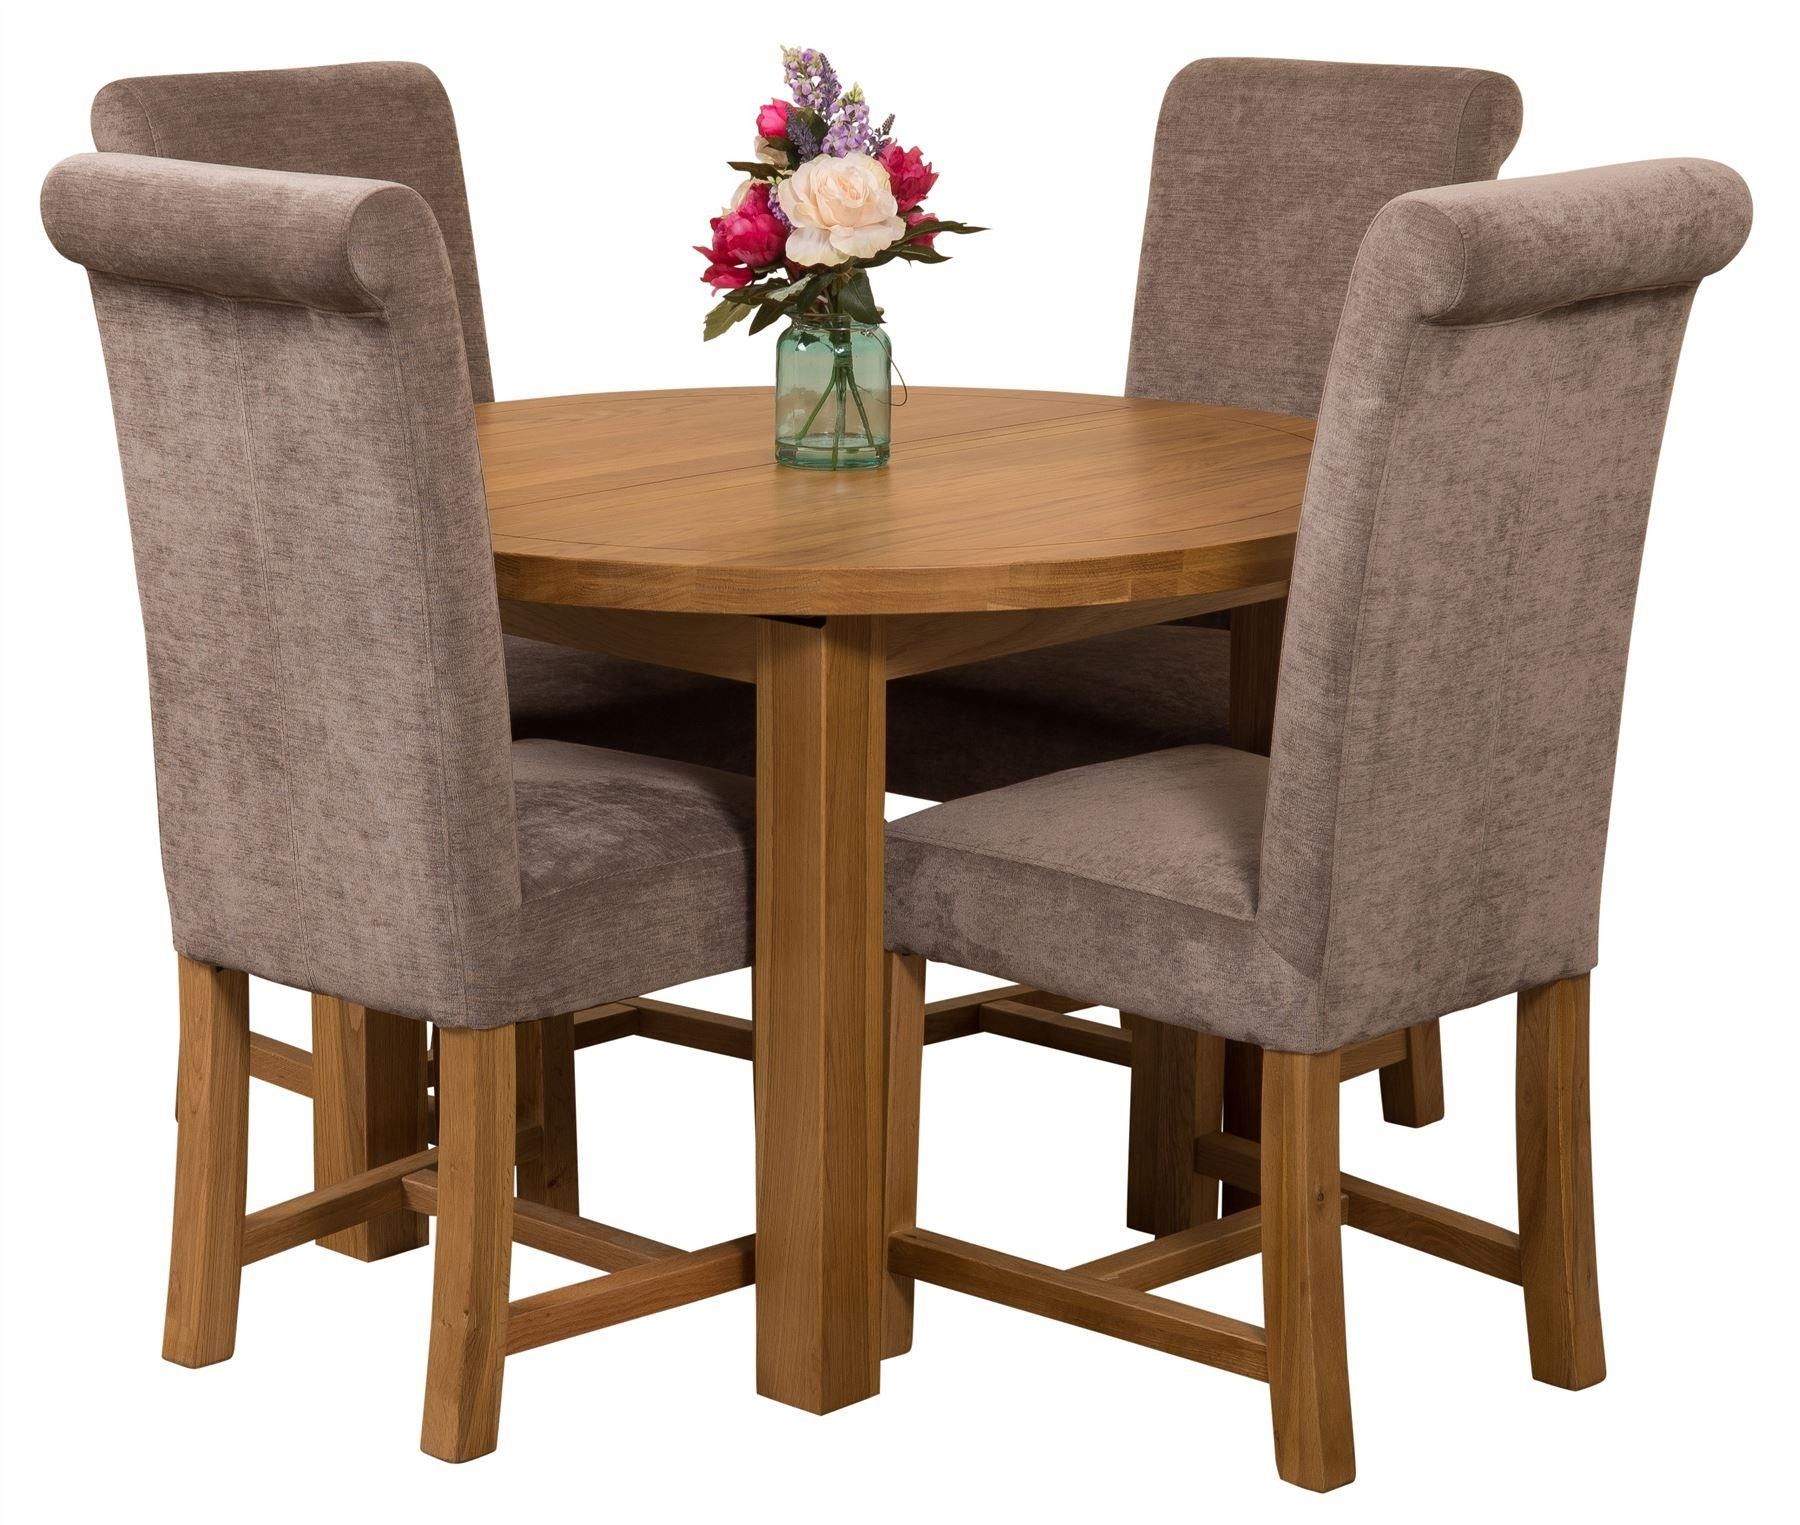 Edmonton Solid Oak Extending Oval Dining Table With 4 Washington Dining Regarding Extendable Oval Dining Sets (View 8 of 15)